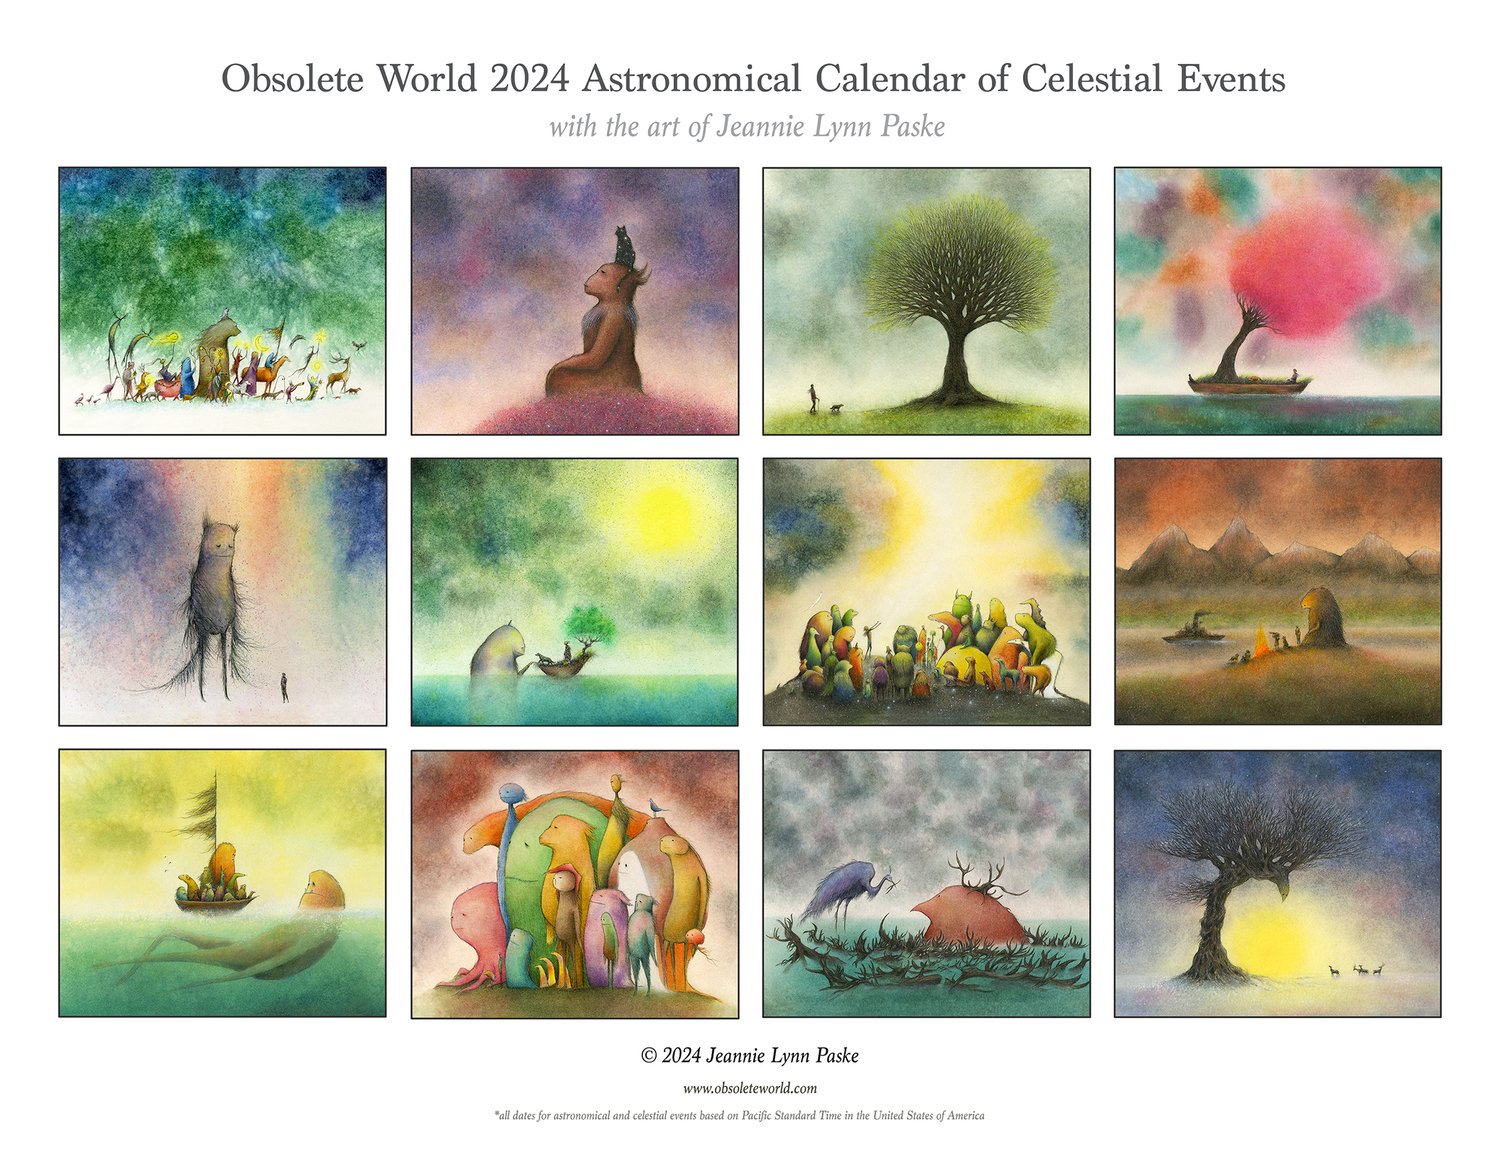 Image of RESERVED LISTING 2024 Obsolete World Wall Art Calendar